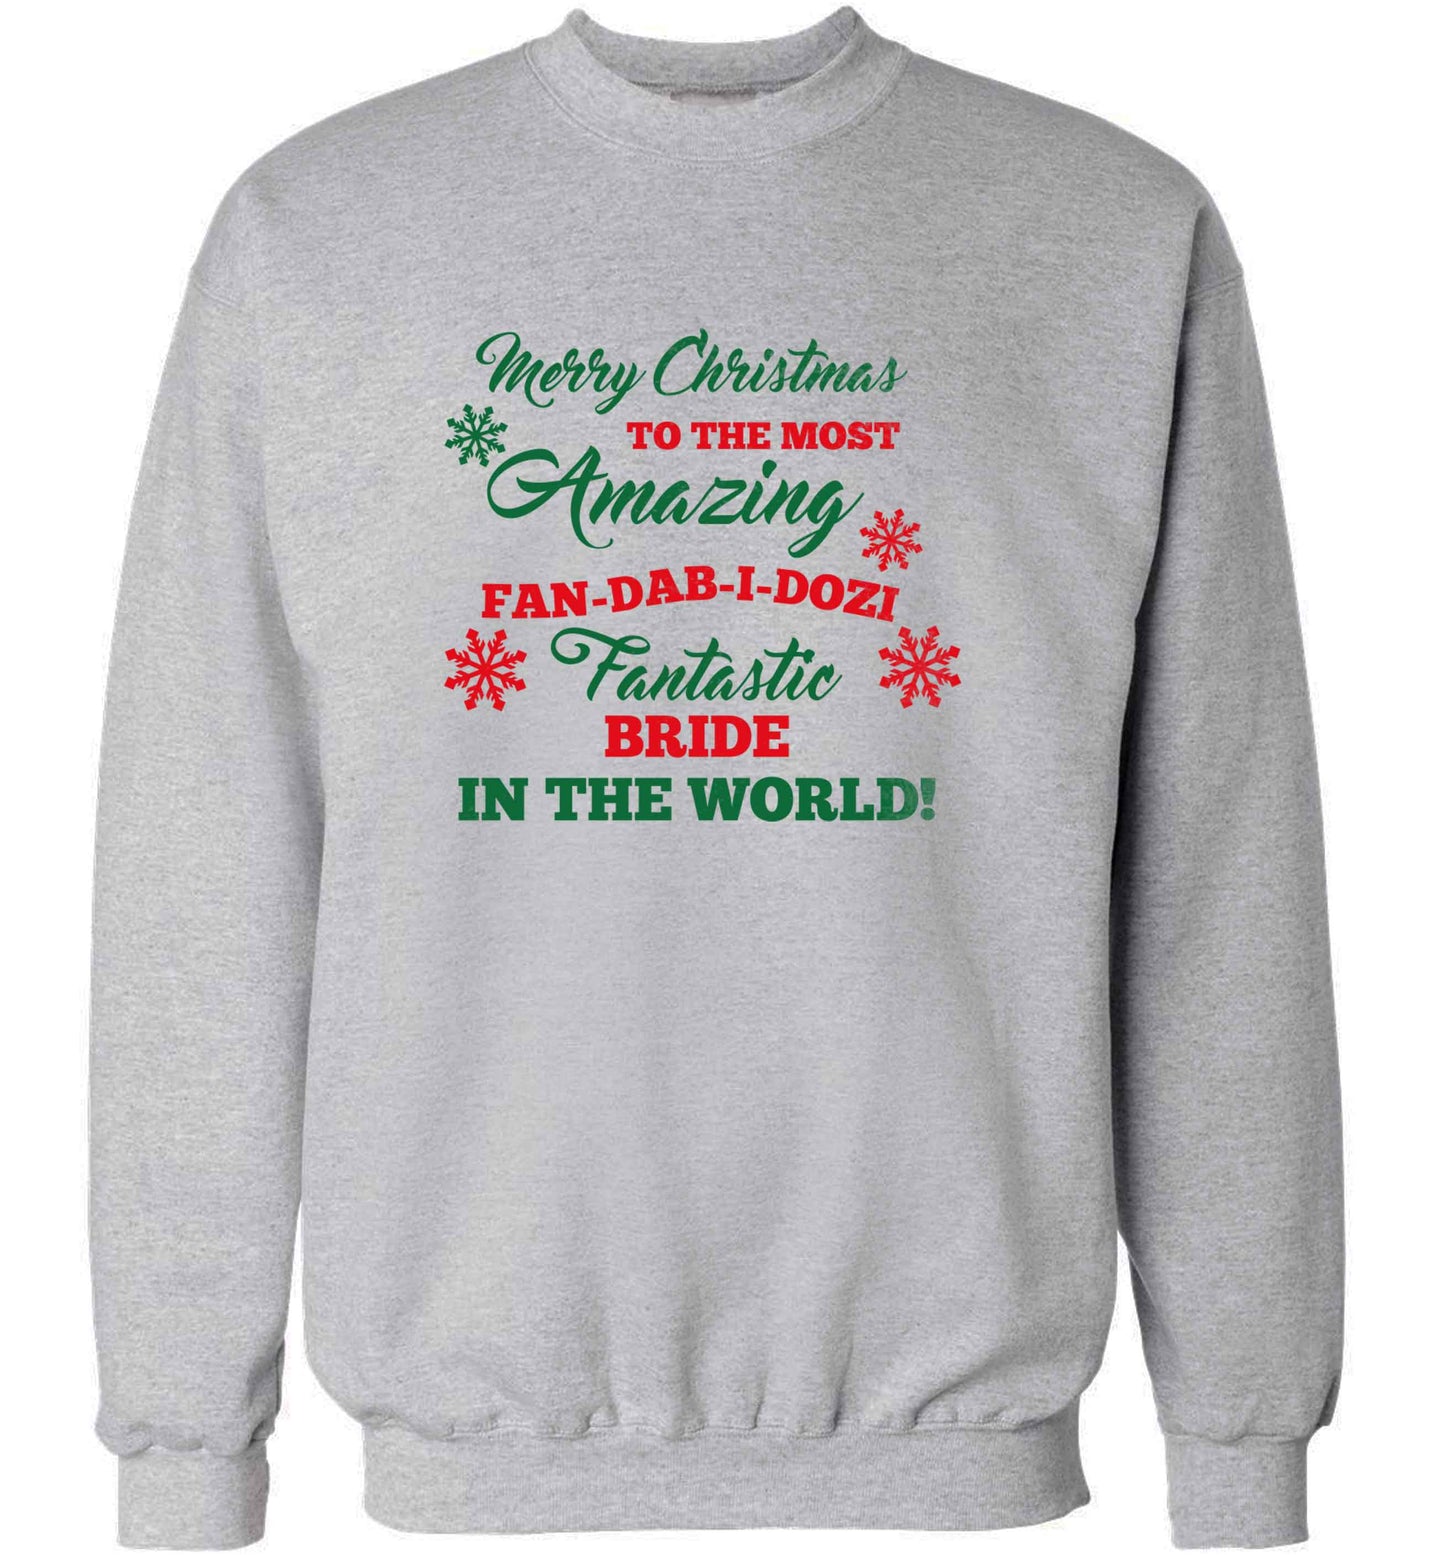 Merry Christmas to the most amazing bride in the world! adult's unisex grey sweater 2XL